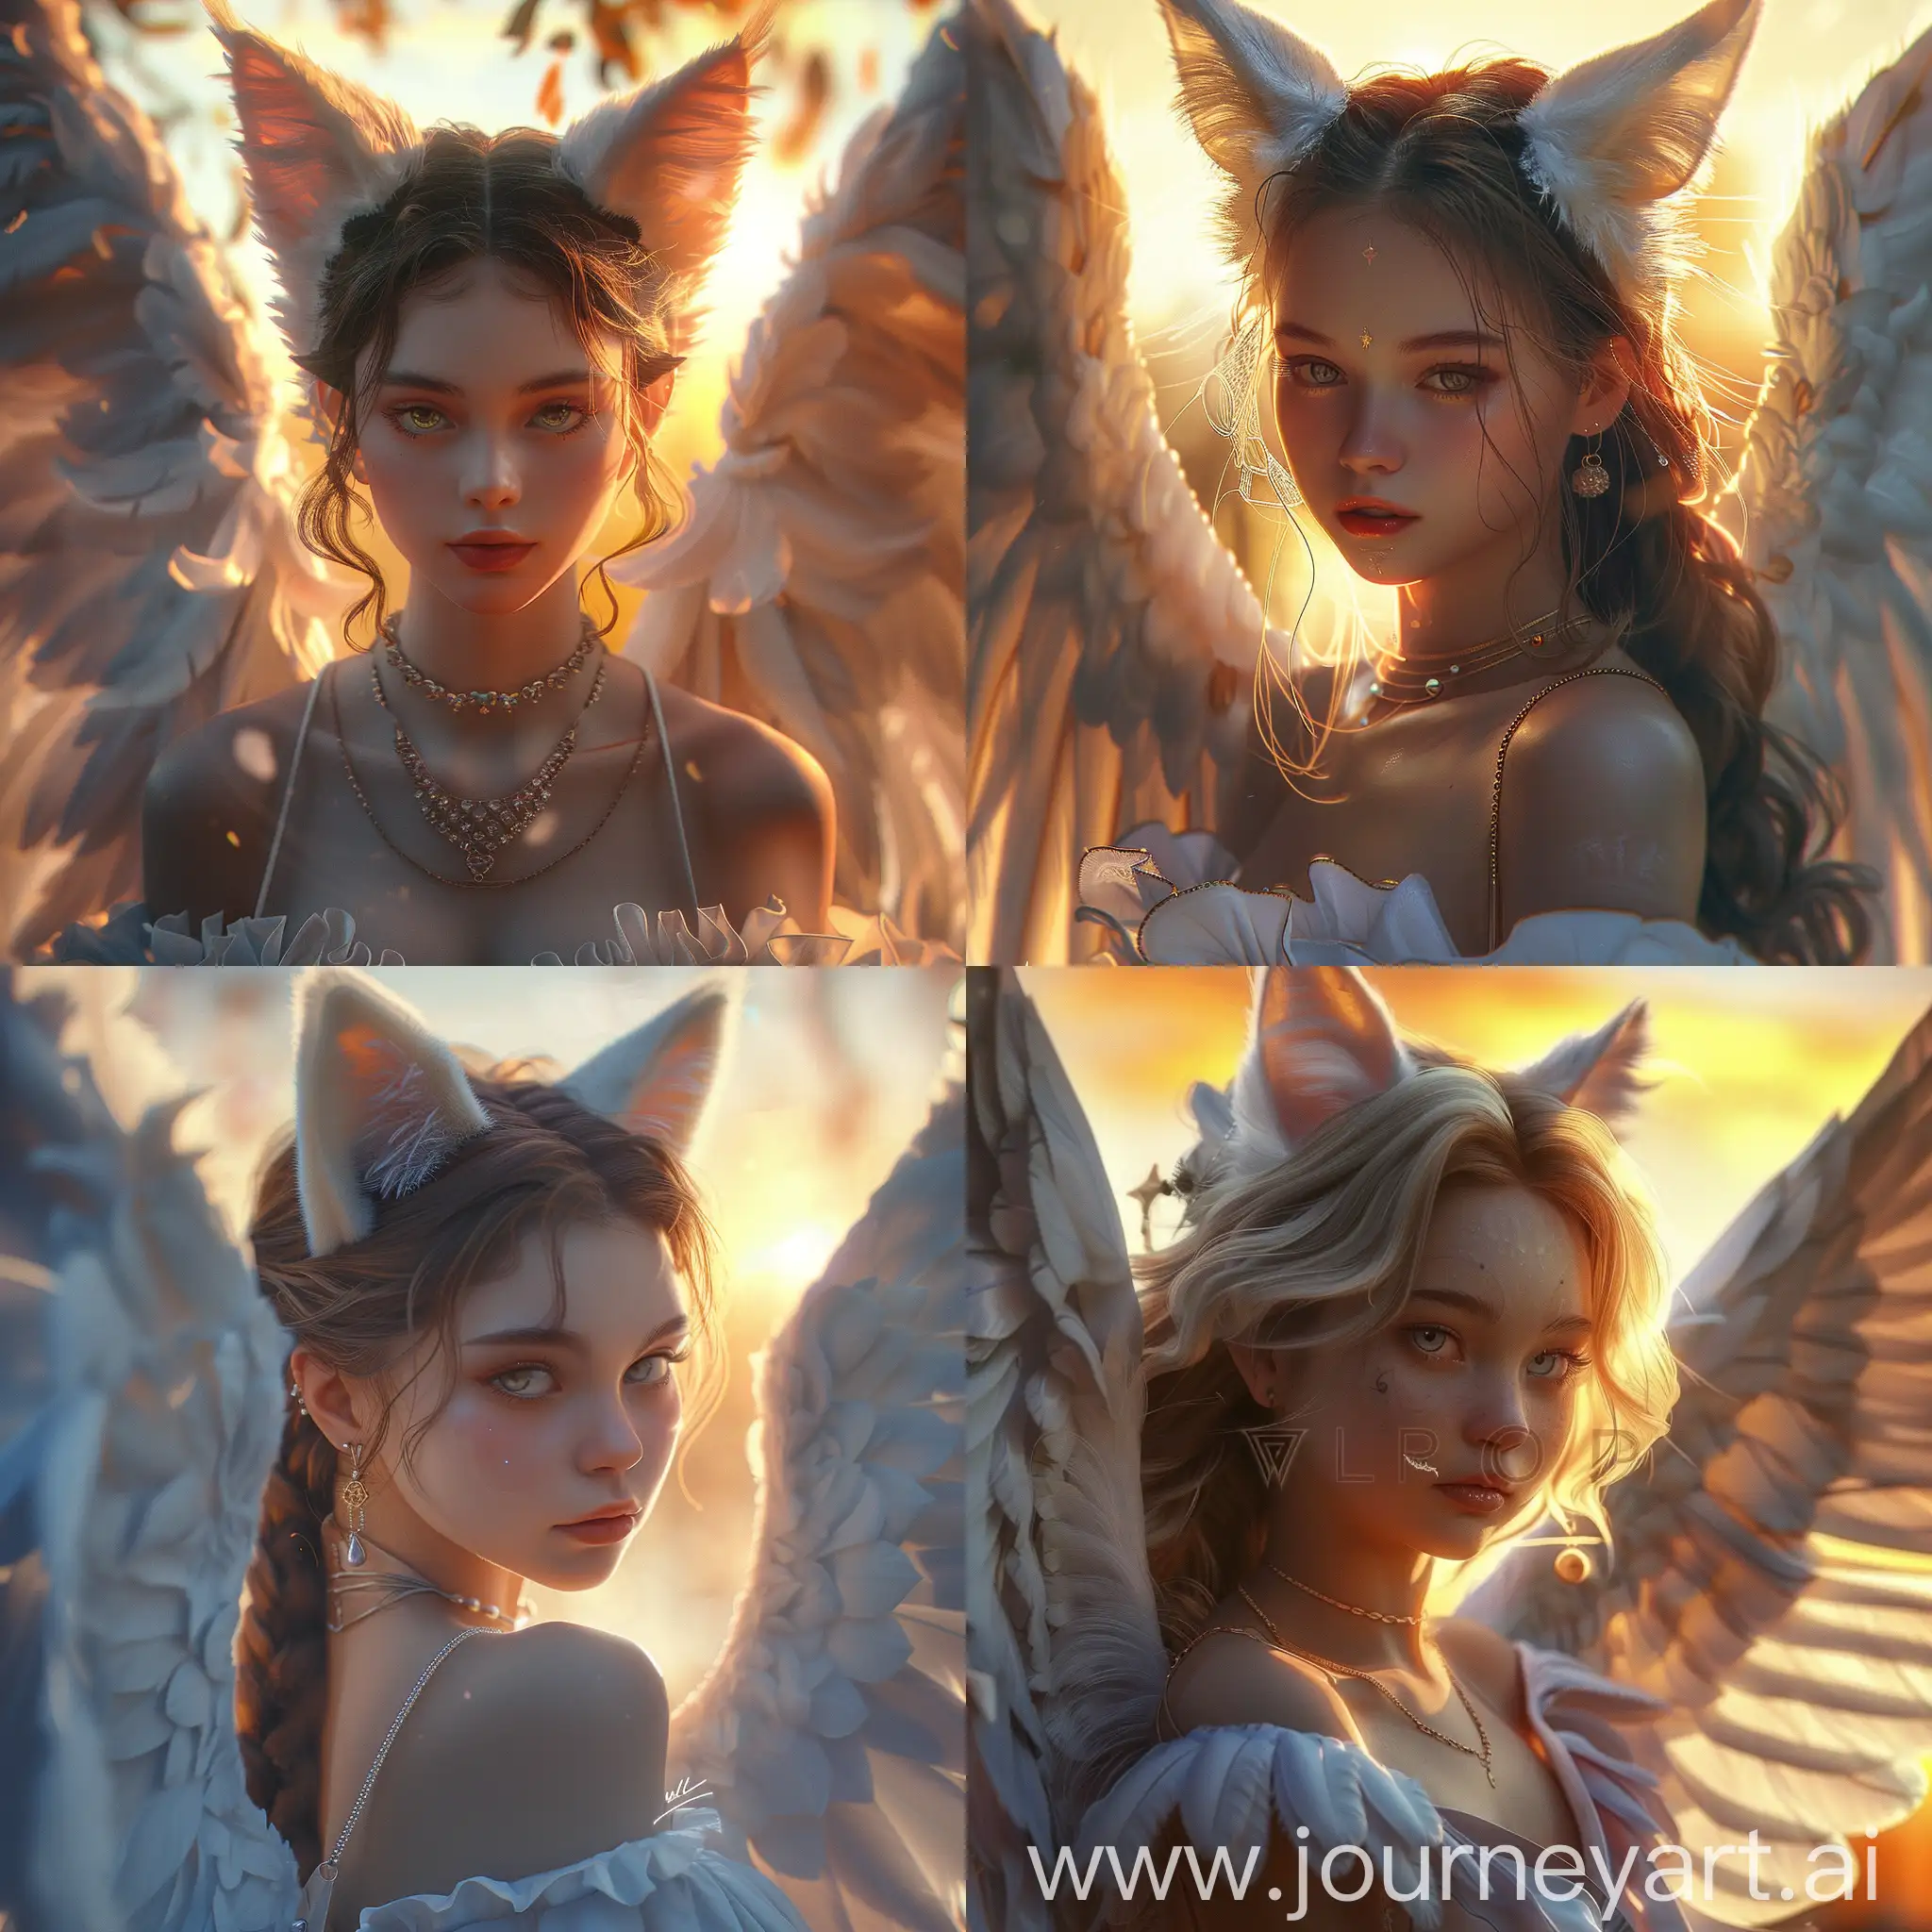 Elegant-Woman-with-Angelic-Wings-Flying-at-Sunset